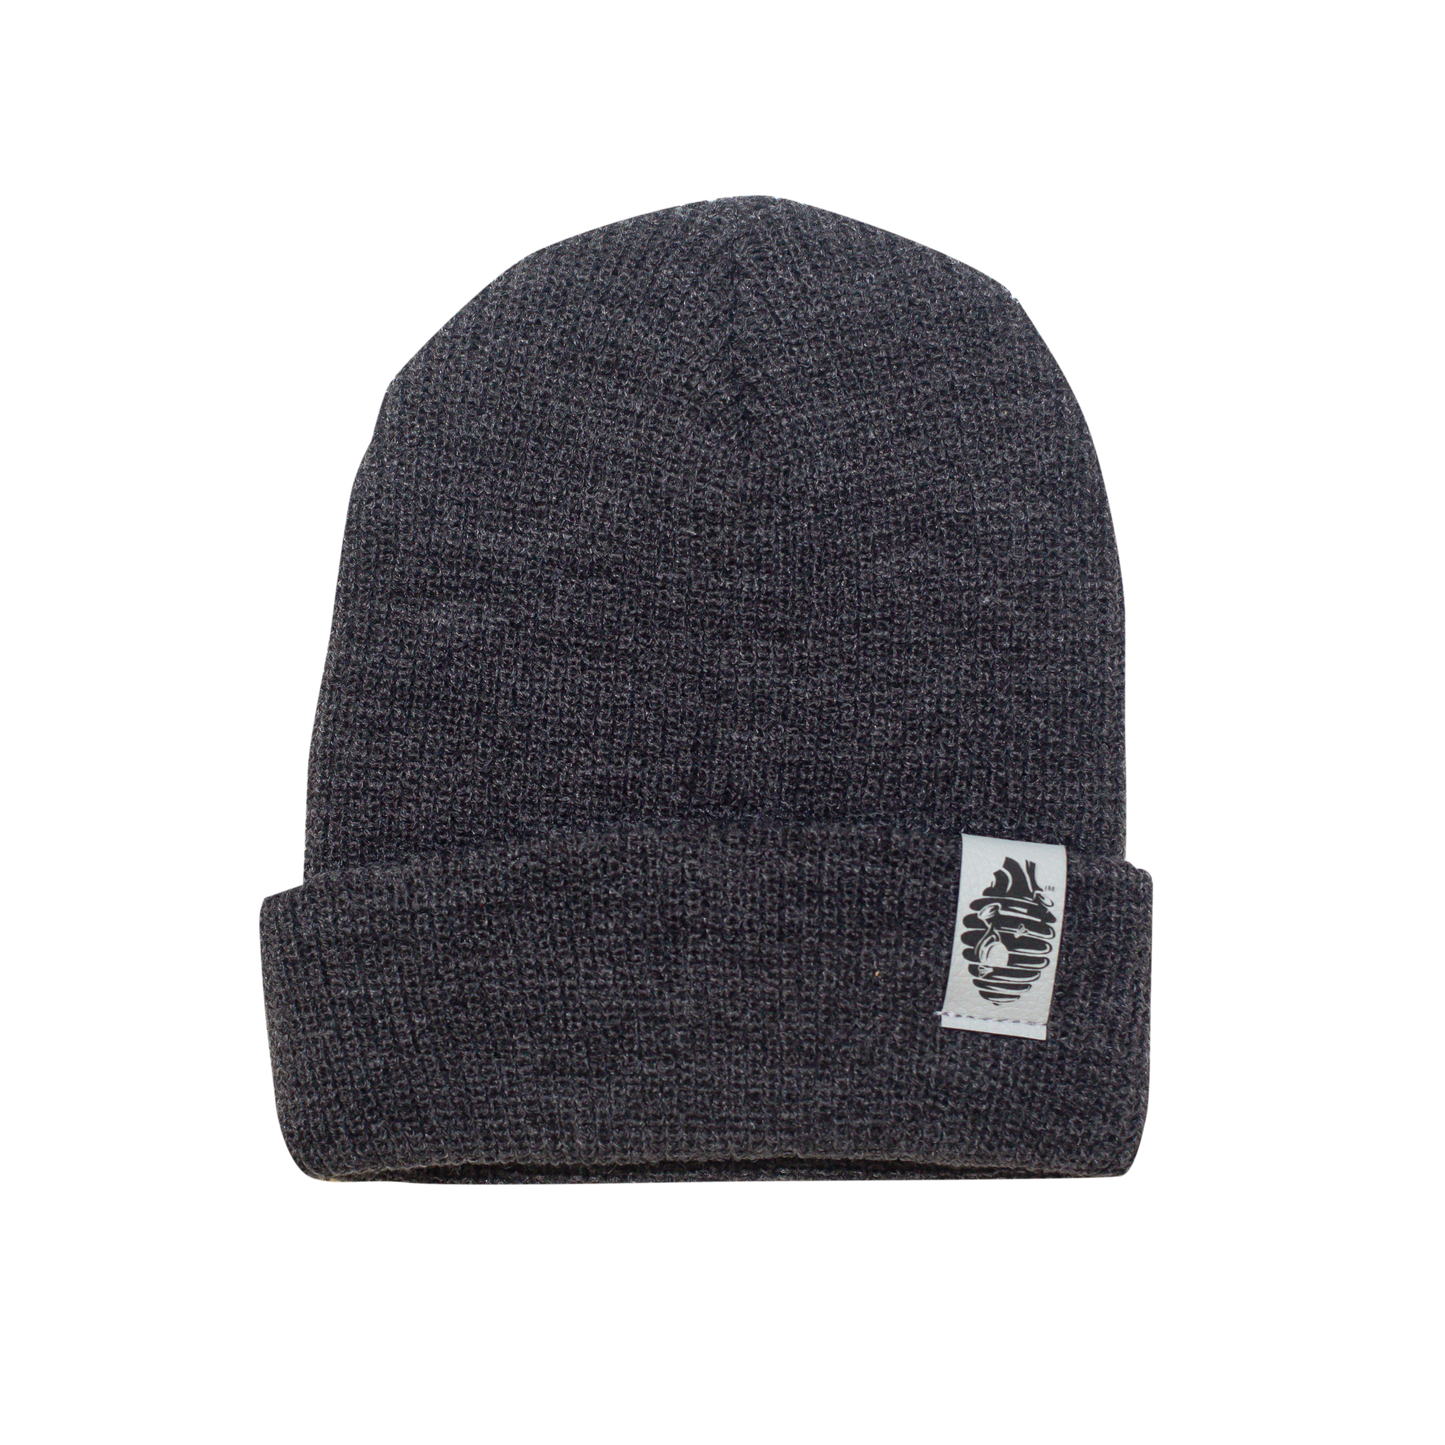 Two Way BE-Hive Beanie // Charcoal